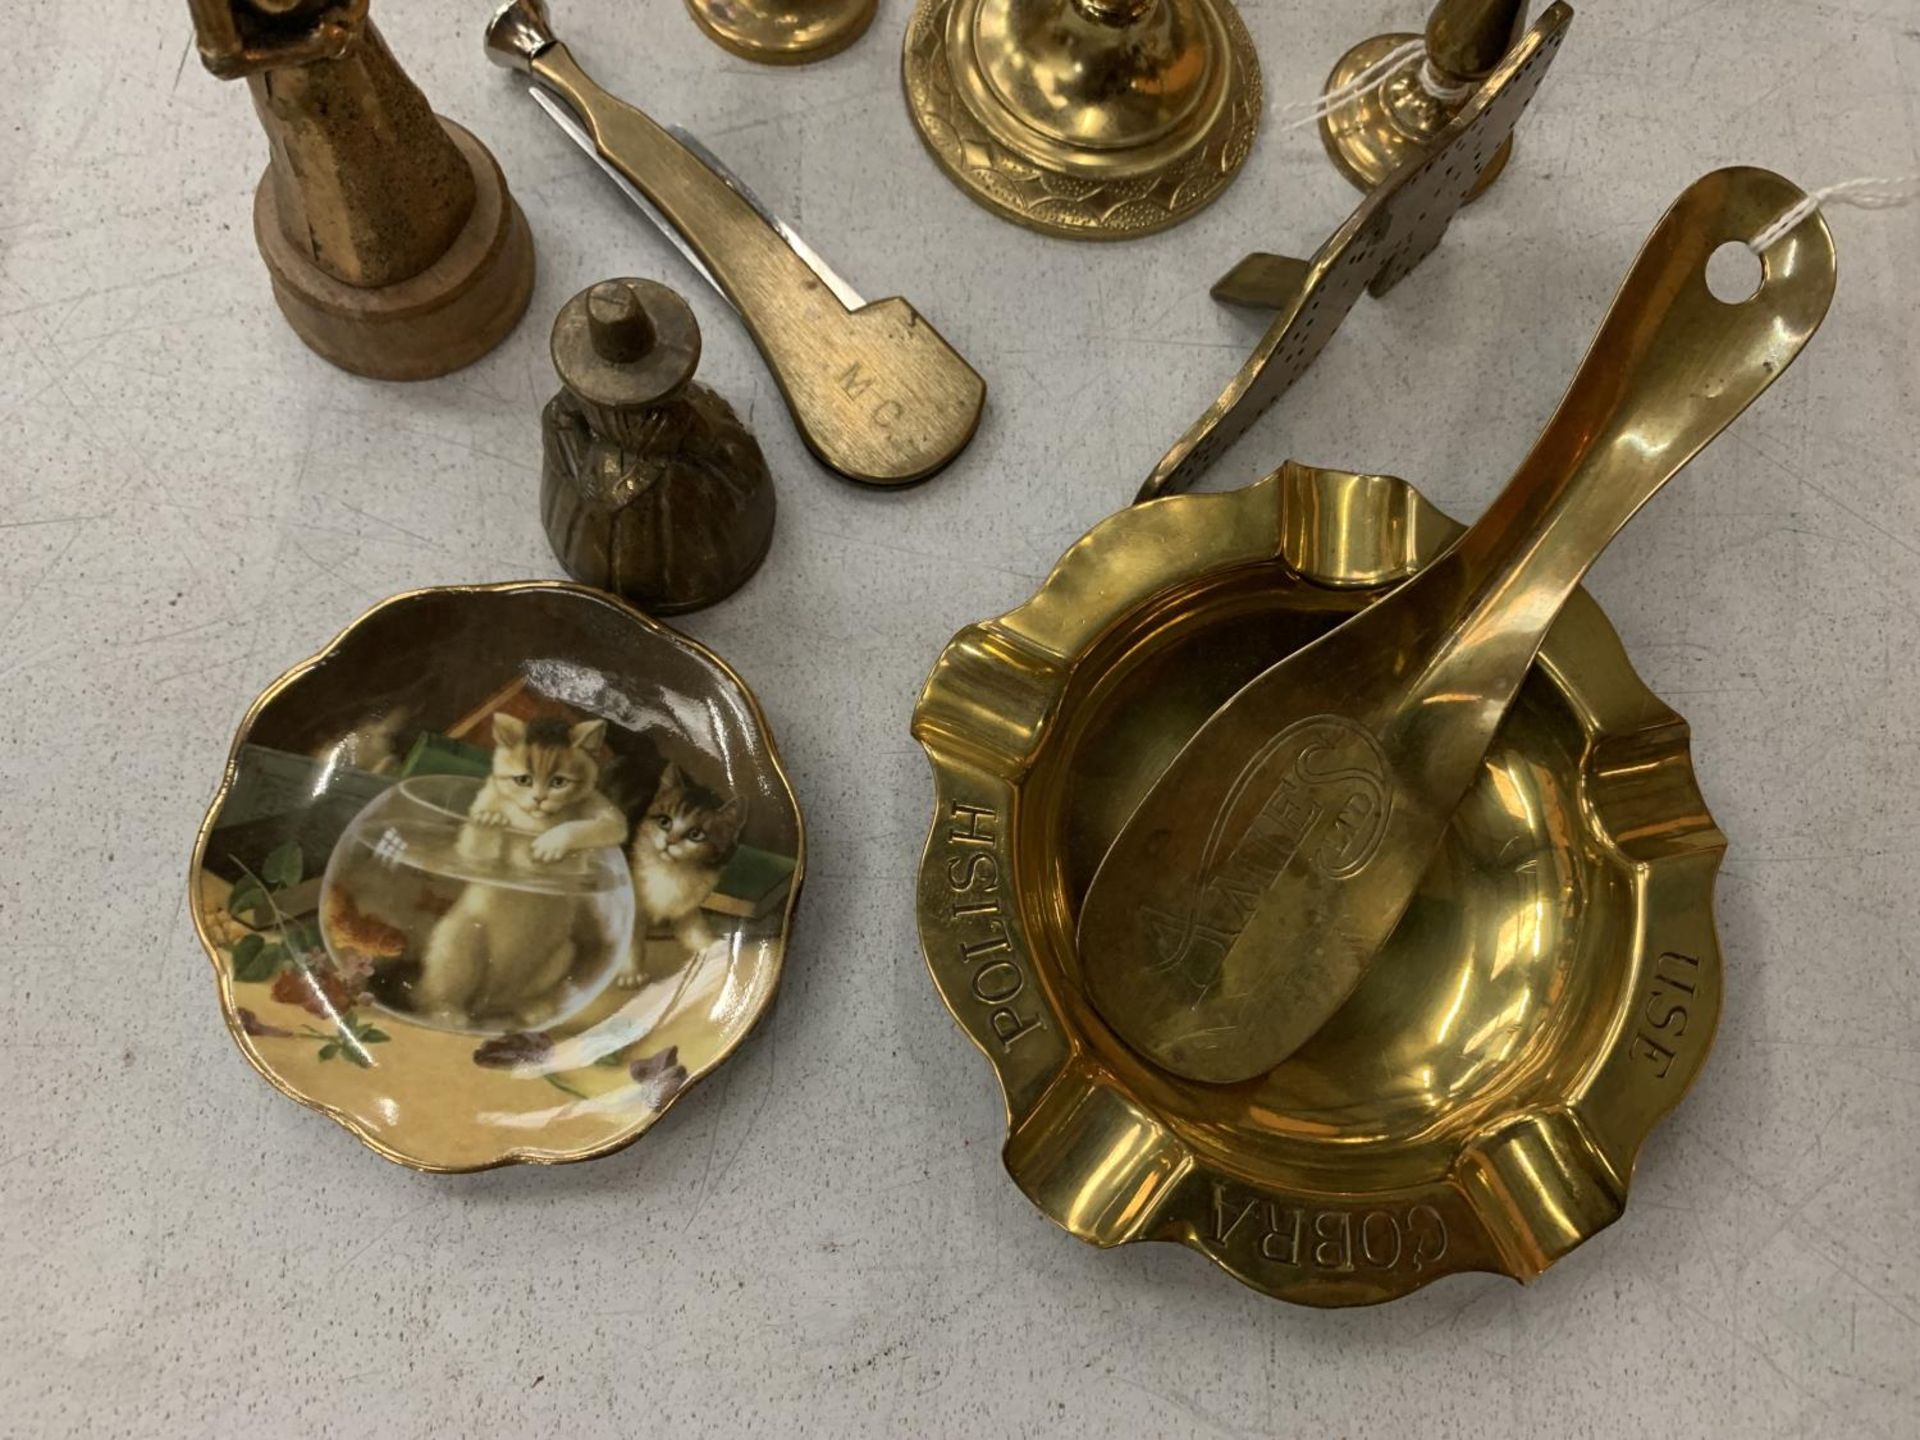 VARIOUS BRASSWARE ITEMS TO INCLUDE WELSH DOLLS, CANDLESTICKS, WEIGHTS ETC - Image 2 of 4